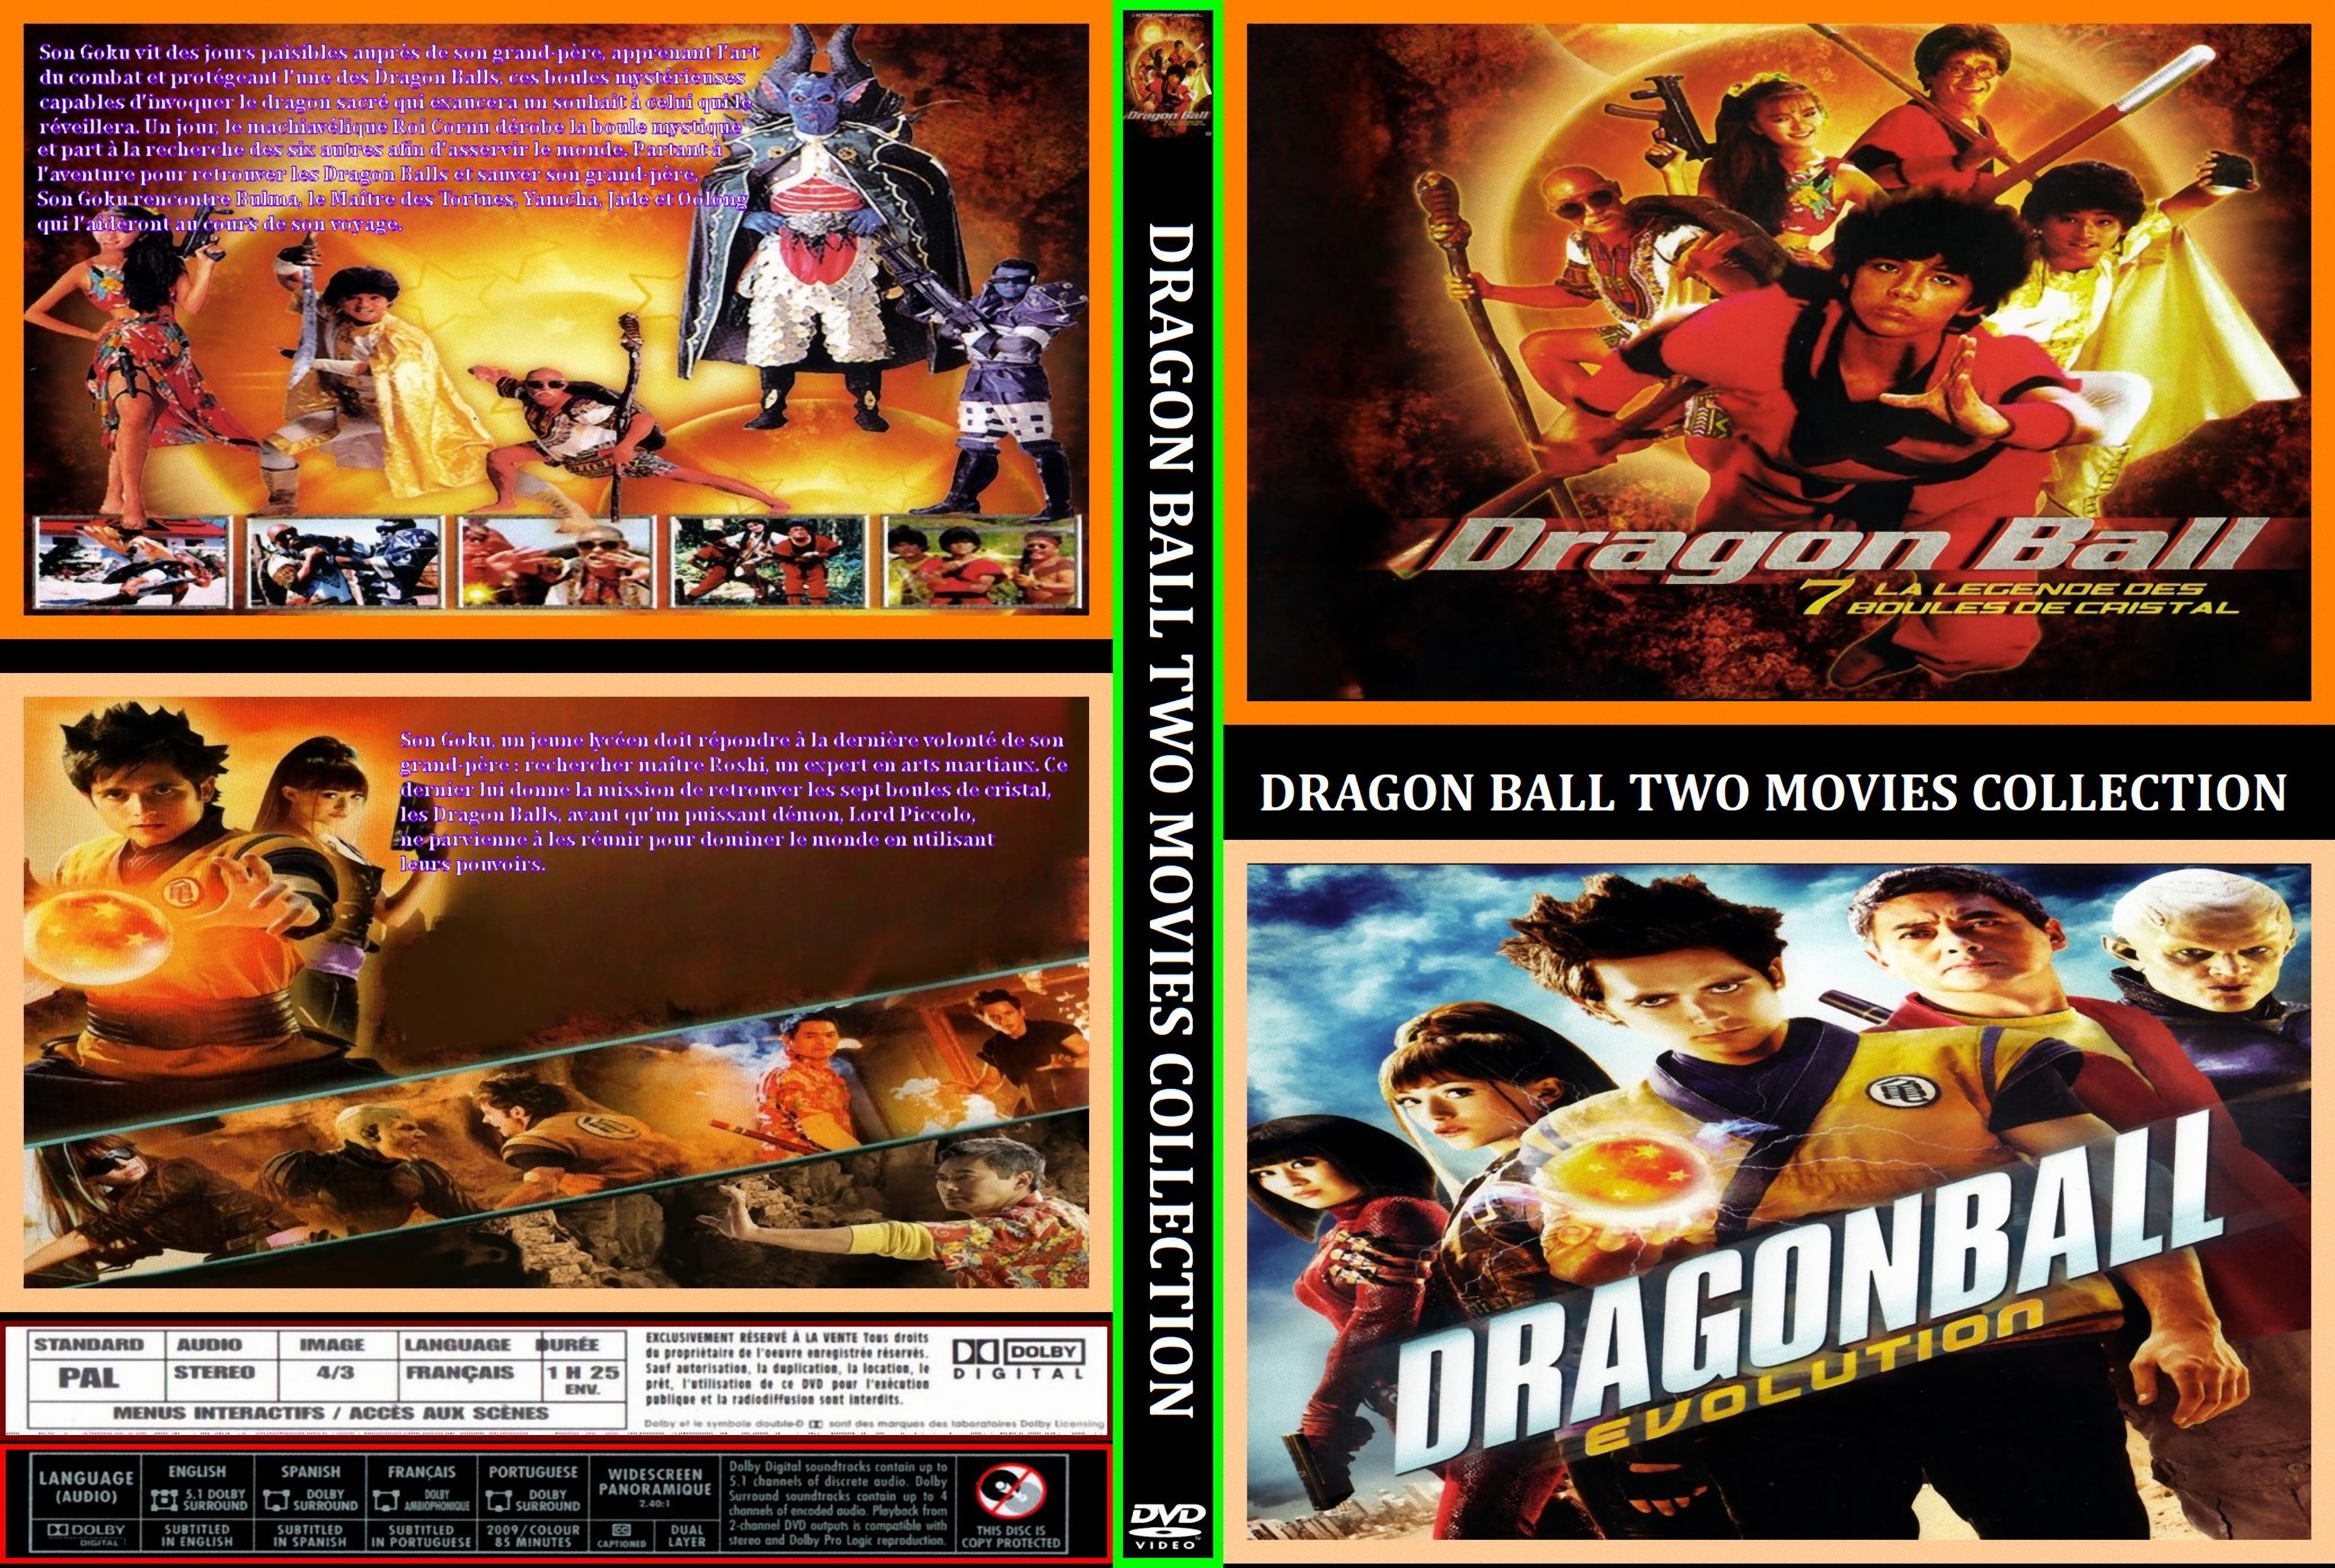 Jaquette DVD Dragon Ball les 2 films collection custom